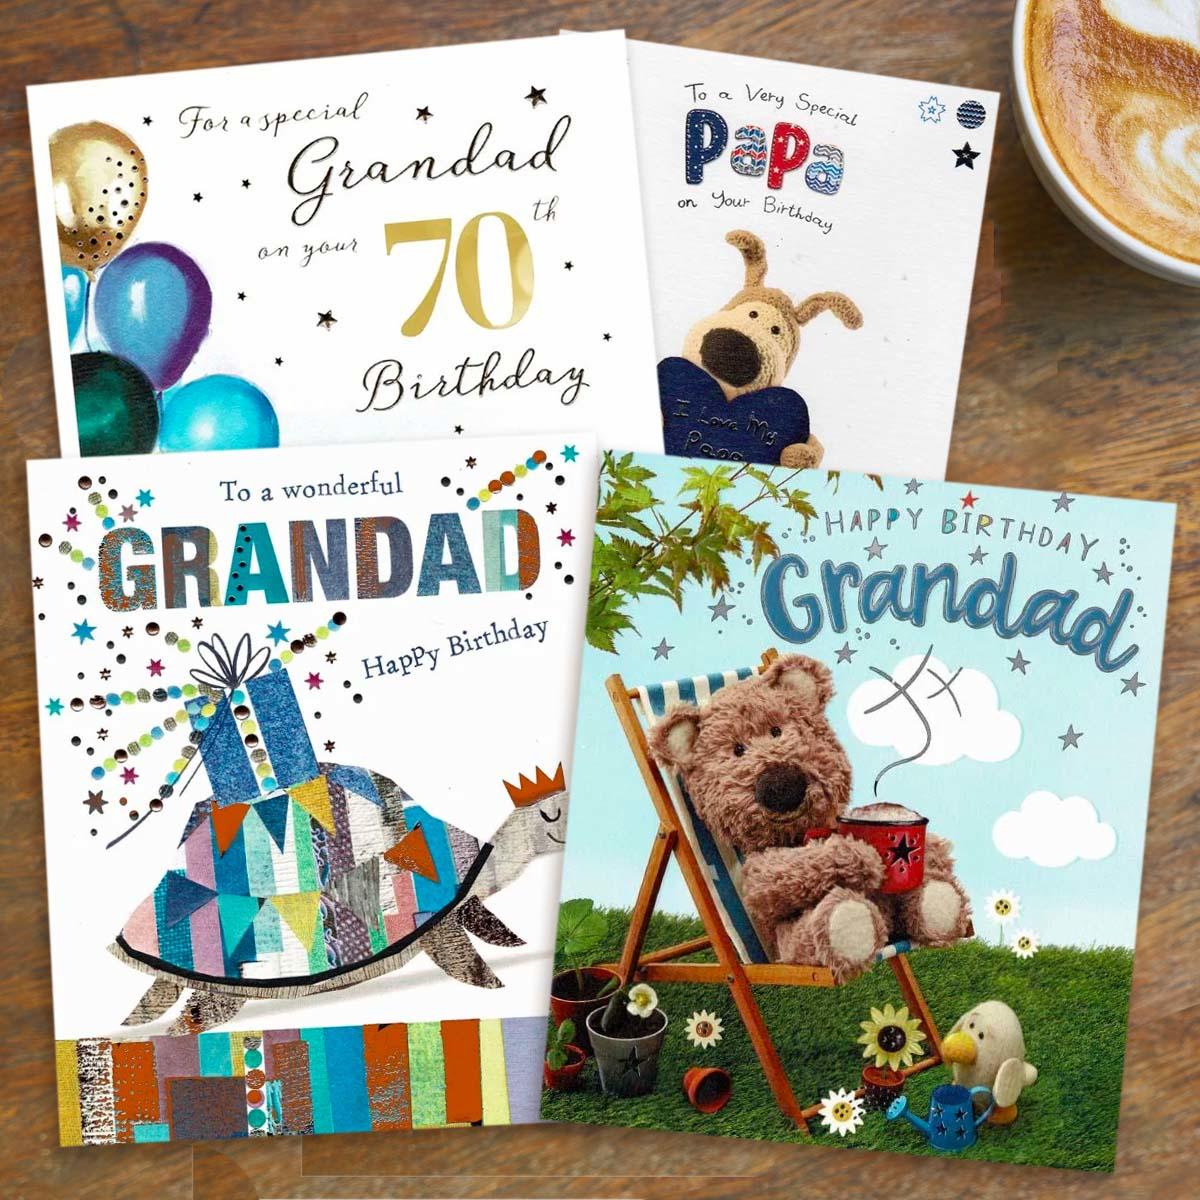 A Selection Of Cards To Show The Depth Of Range In Our Male Grandparents Birthday Section